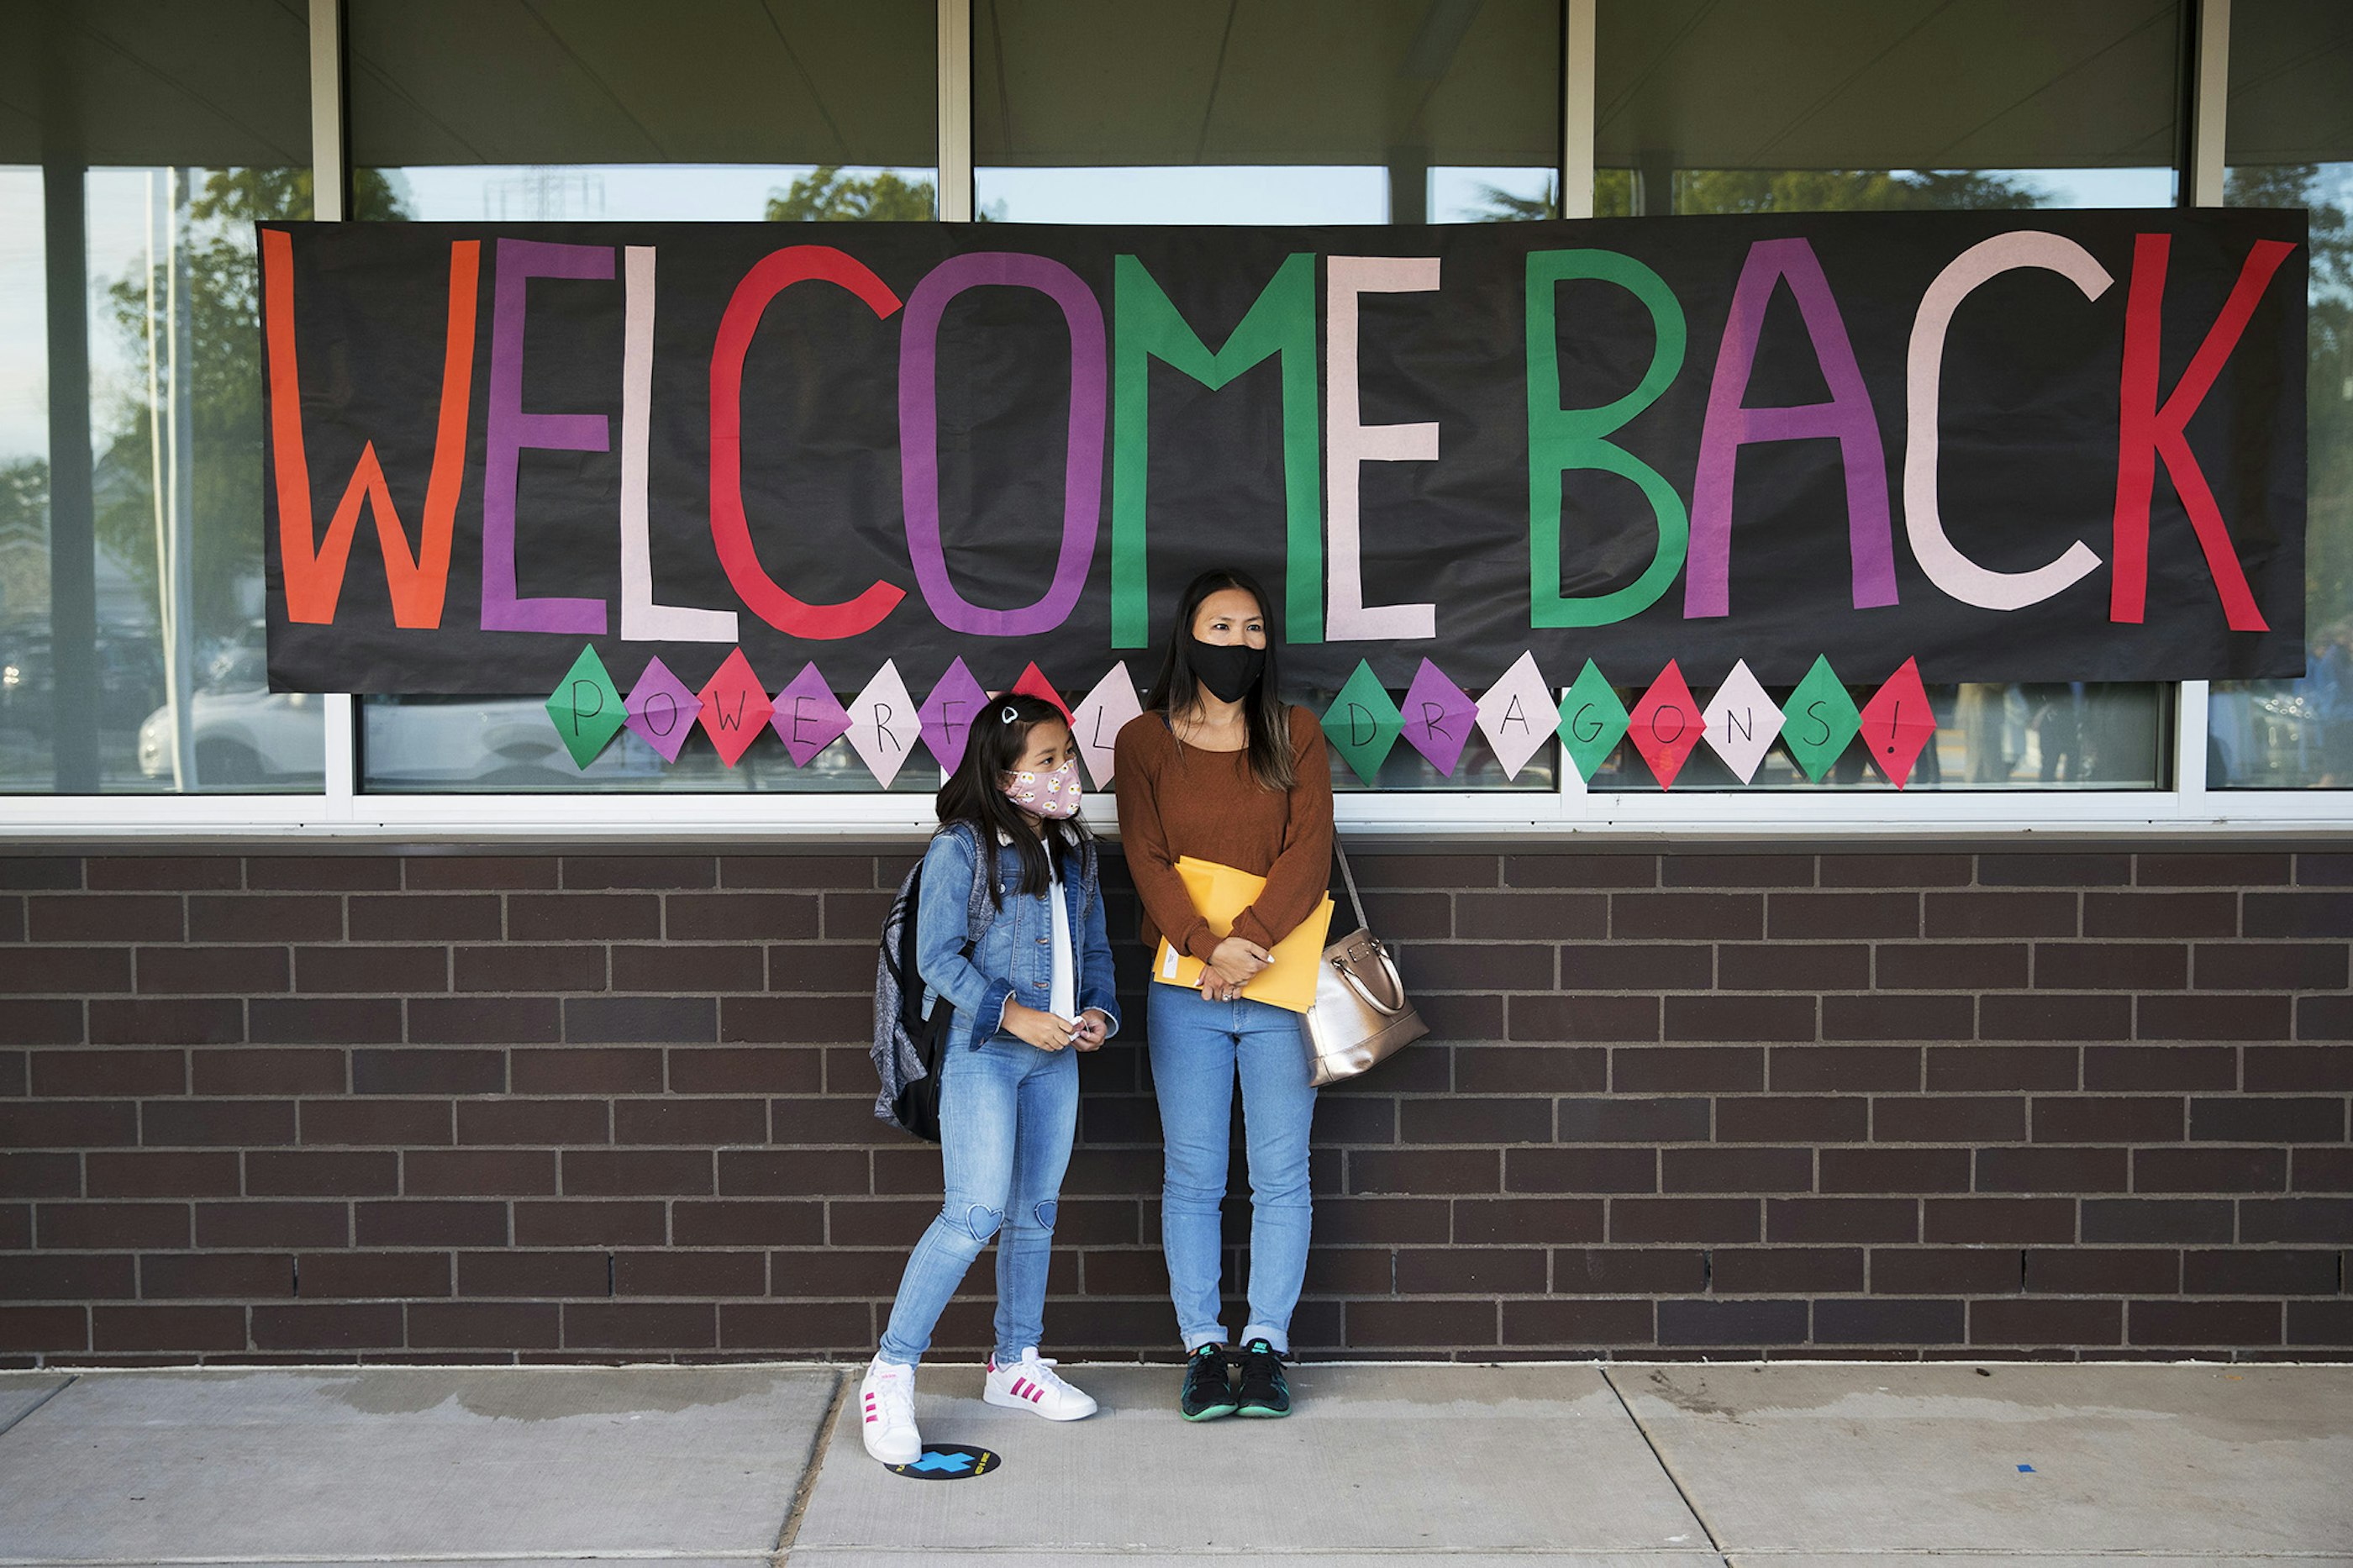 Third-grade student Maliyah Ouk, 8, stands with her mother Victoria Saetern before the first day of school begins at Wing Luke Elementary School on Wednesday, September 1, 2021, along Kenyon Street in Seattle.